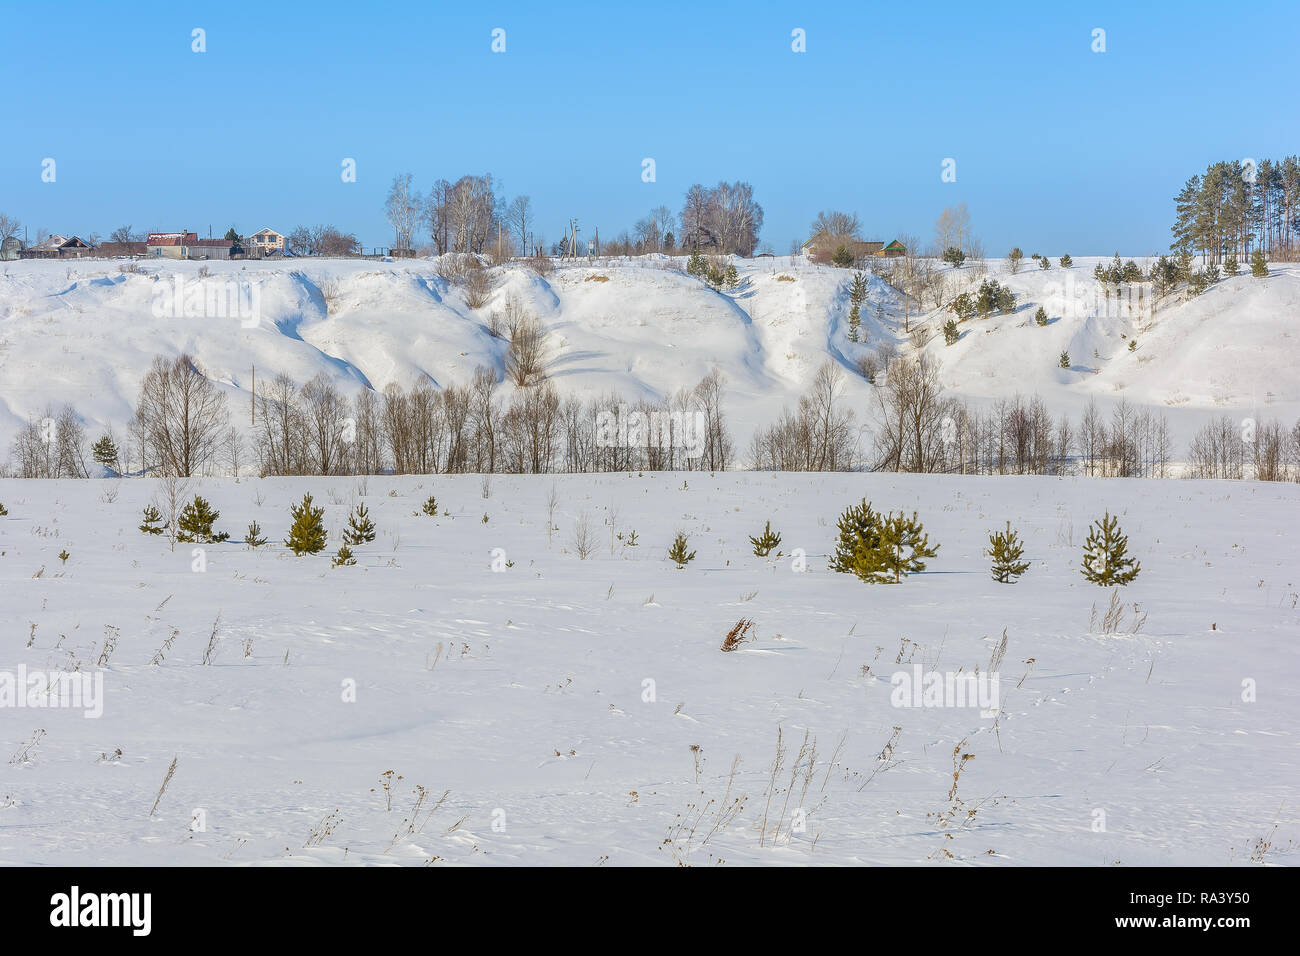 The snowy hills around the fields and forests in winter Stock Photo